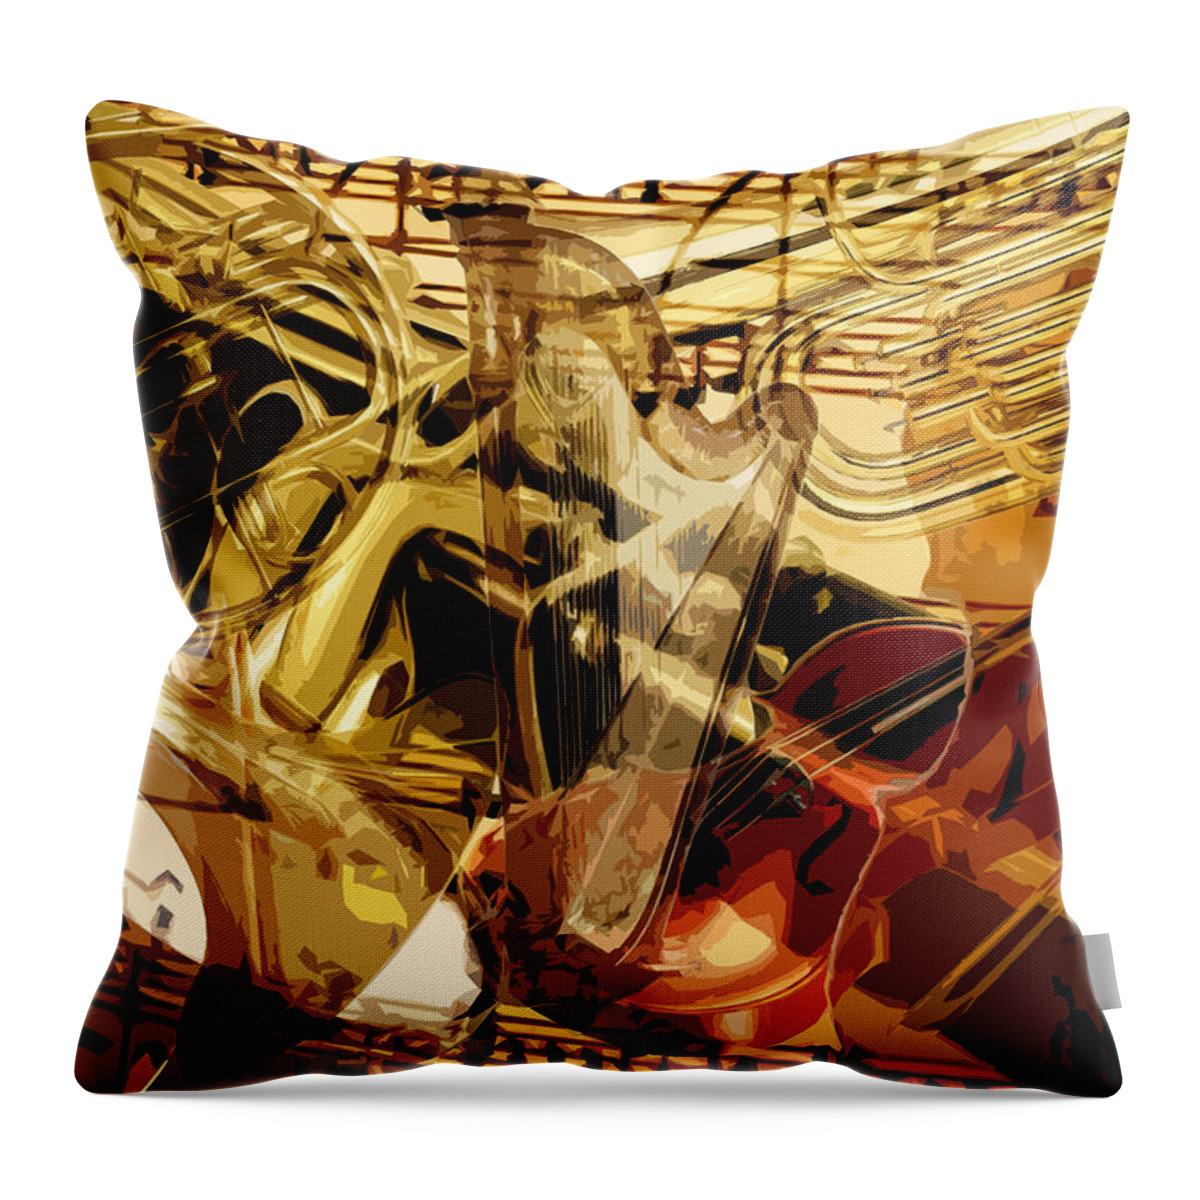 Classical Music Throw Pillow featuring the digital art Instruments by John Vincent Palozzi